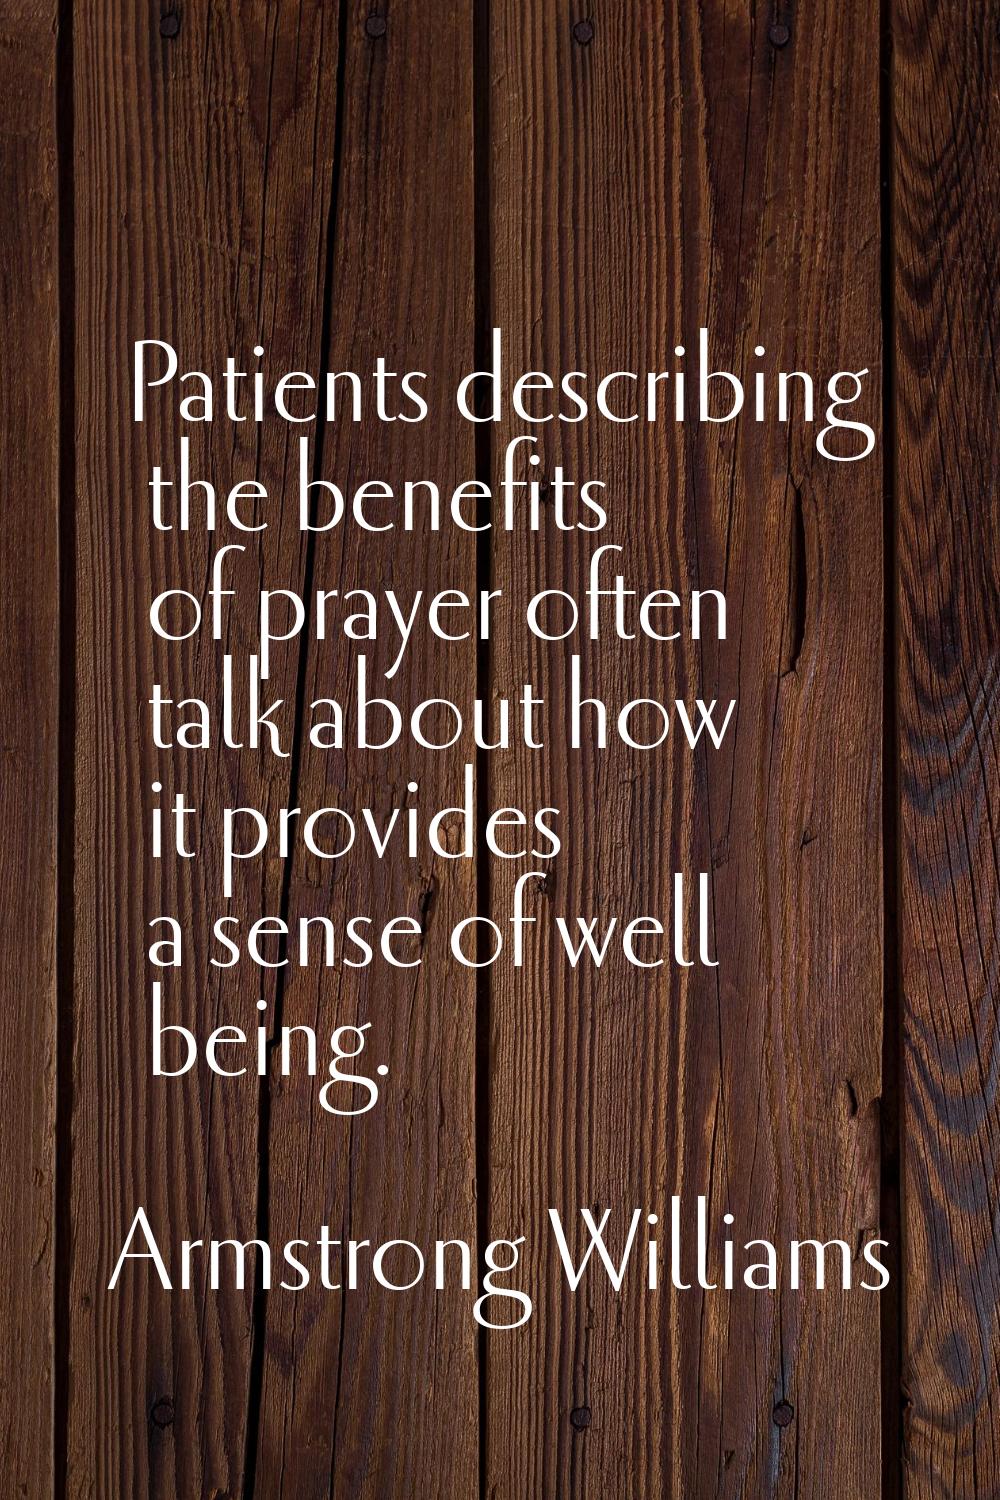 Patients describing the benefits of prayer often talk about how it provides a sense of well being.